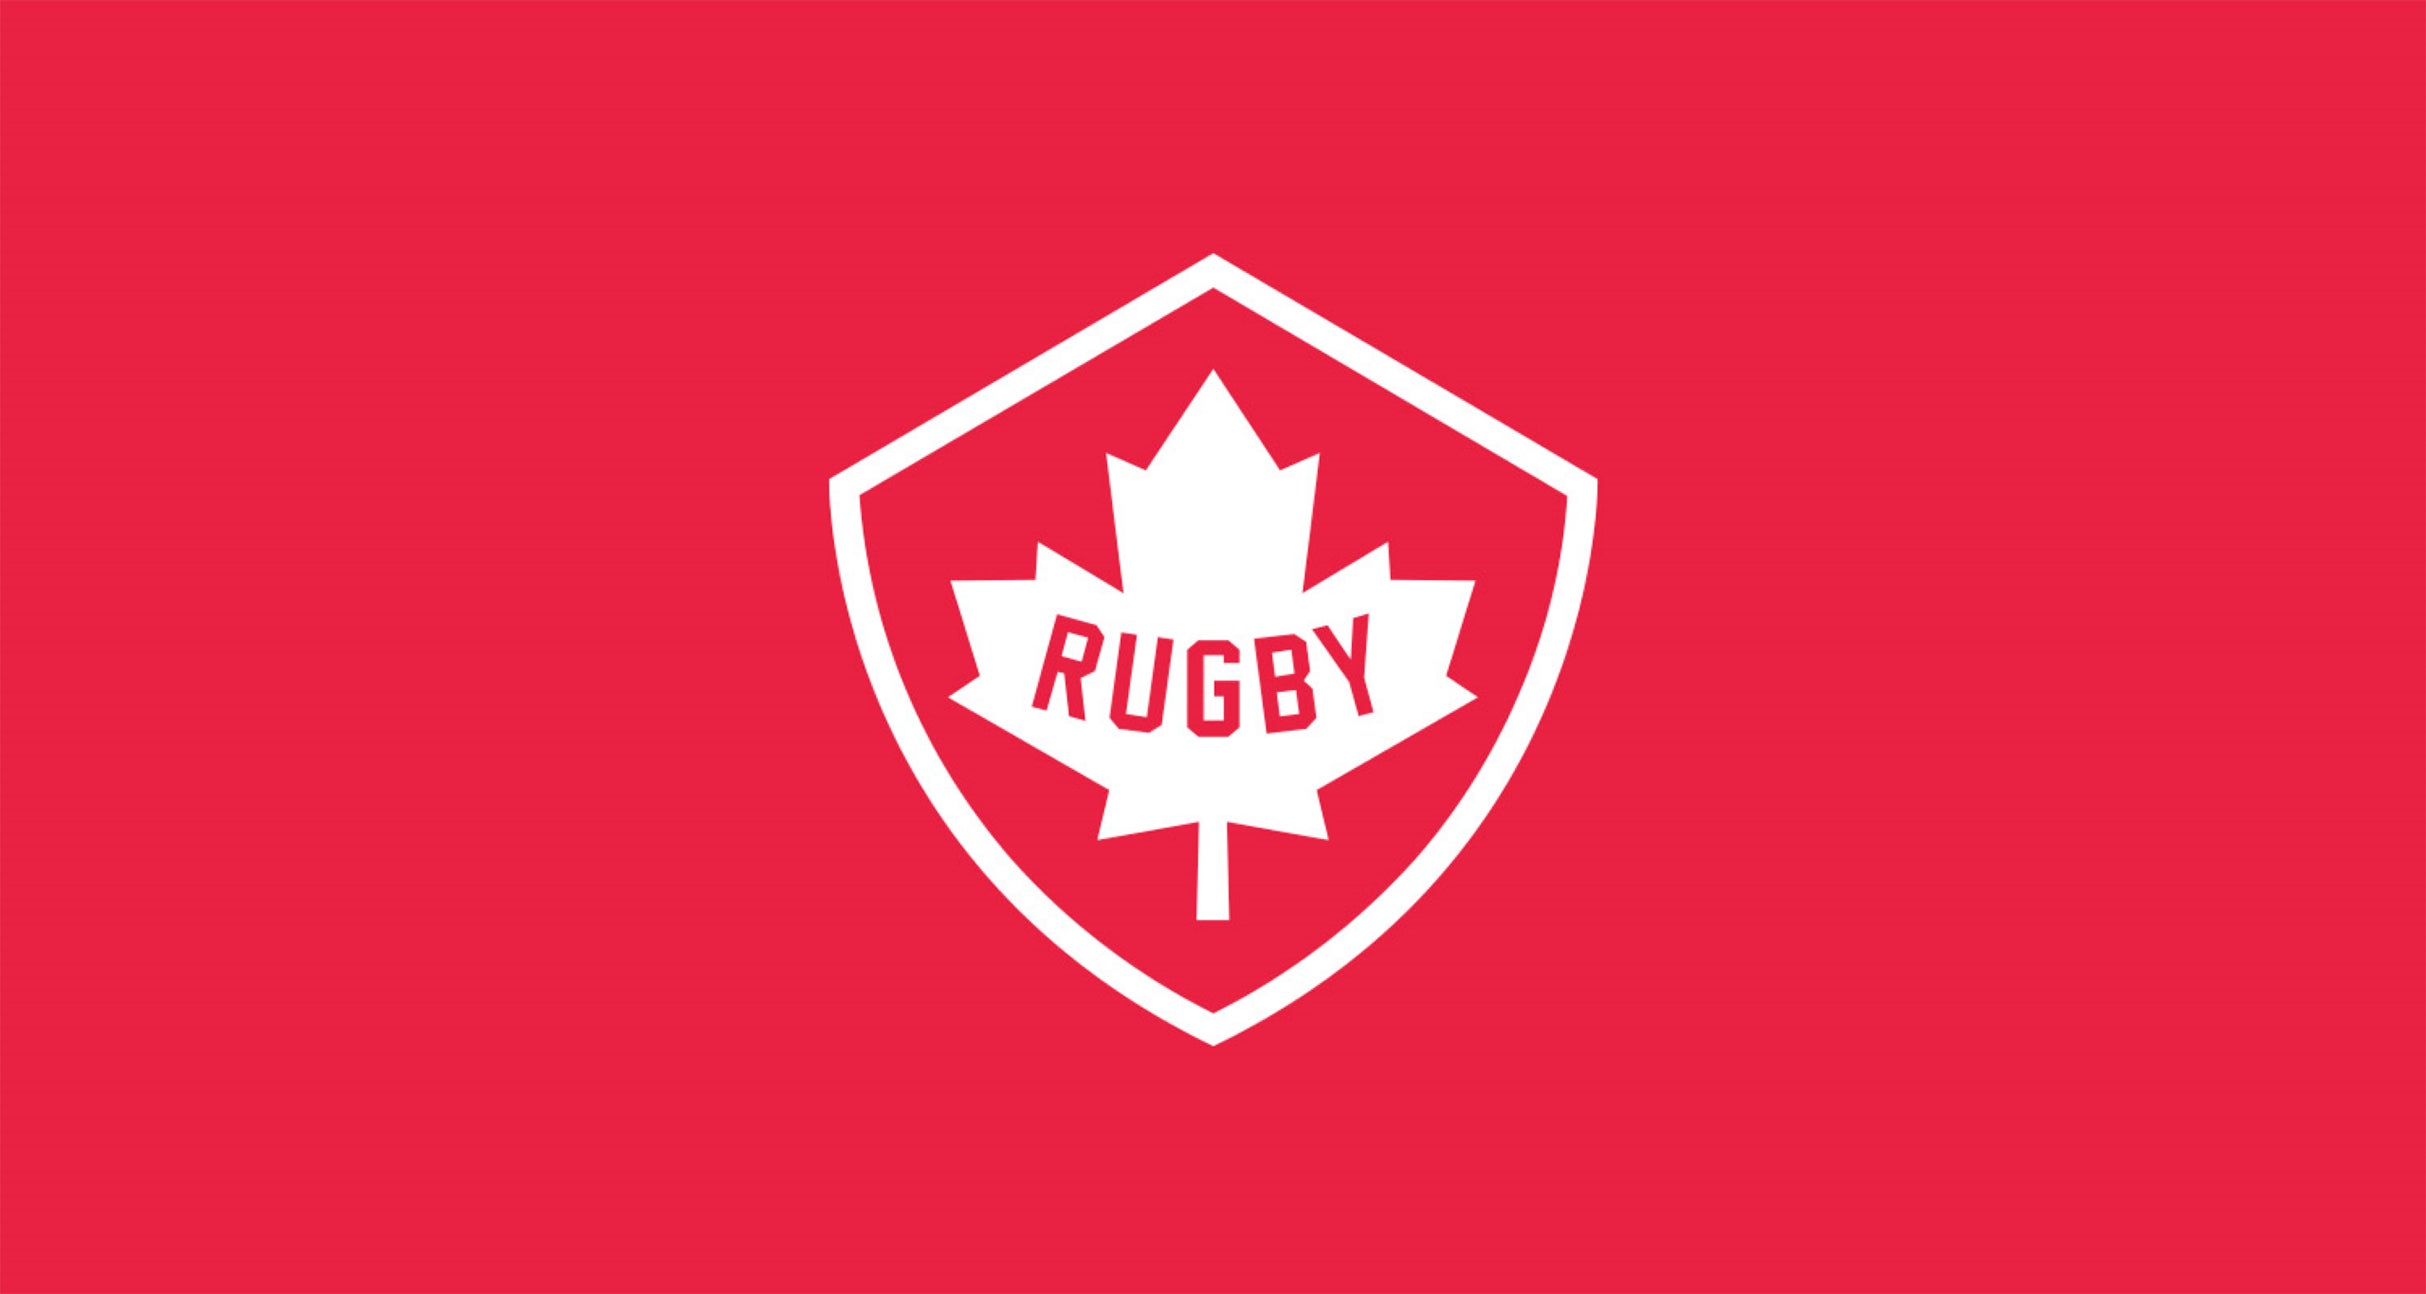 Canada Men's Rugby v. Scotland in Ottawa promo photo for TD Place Insider presale offer code